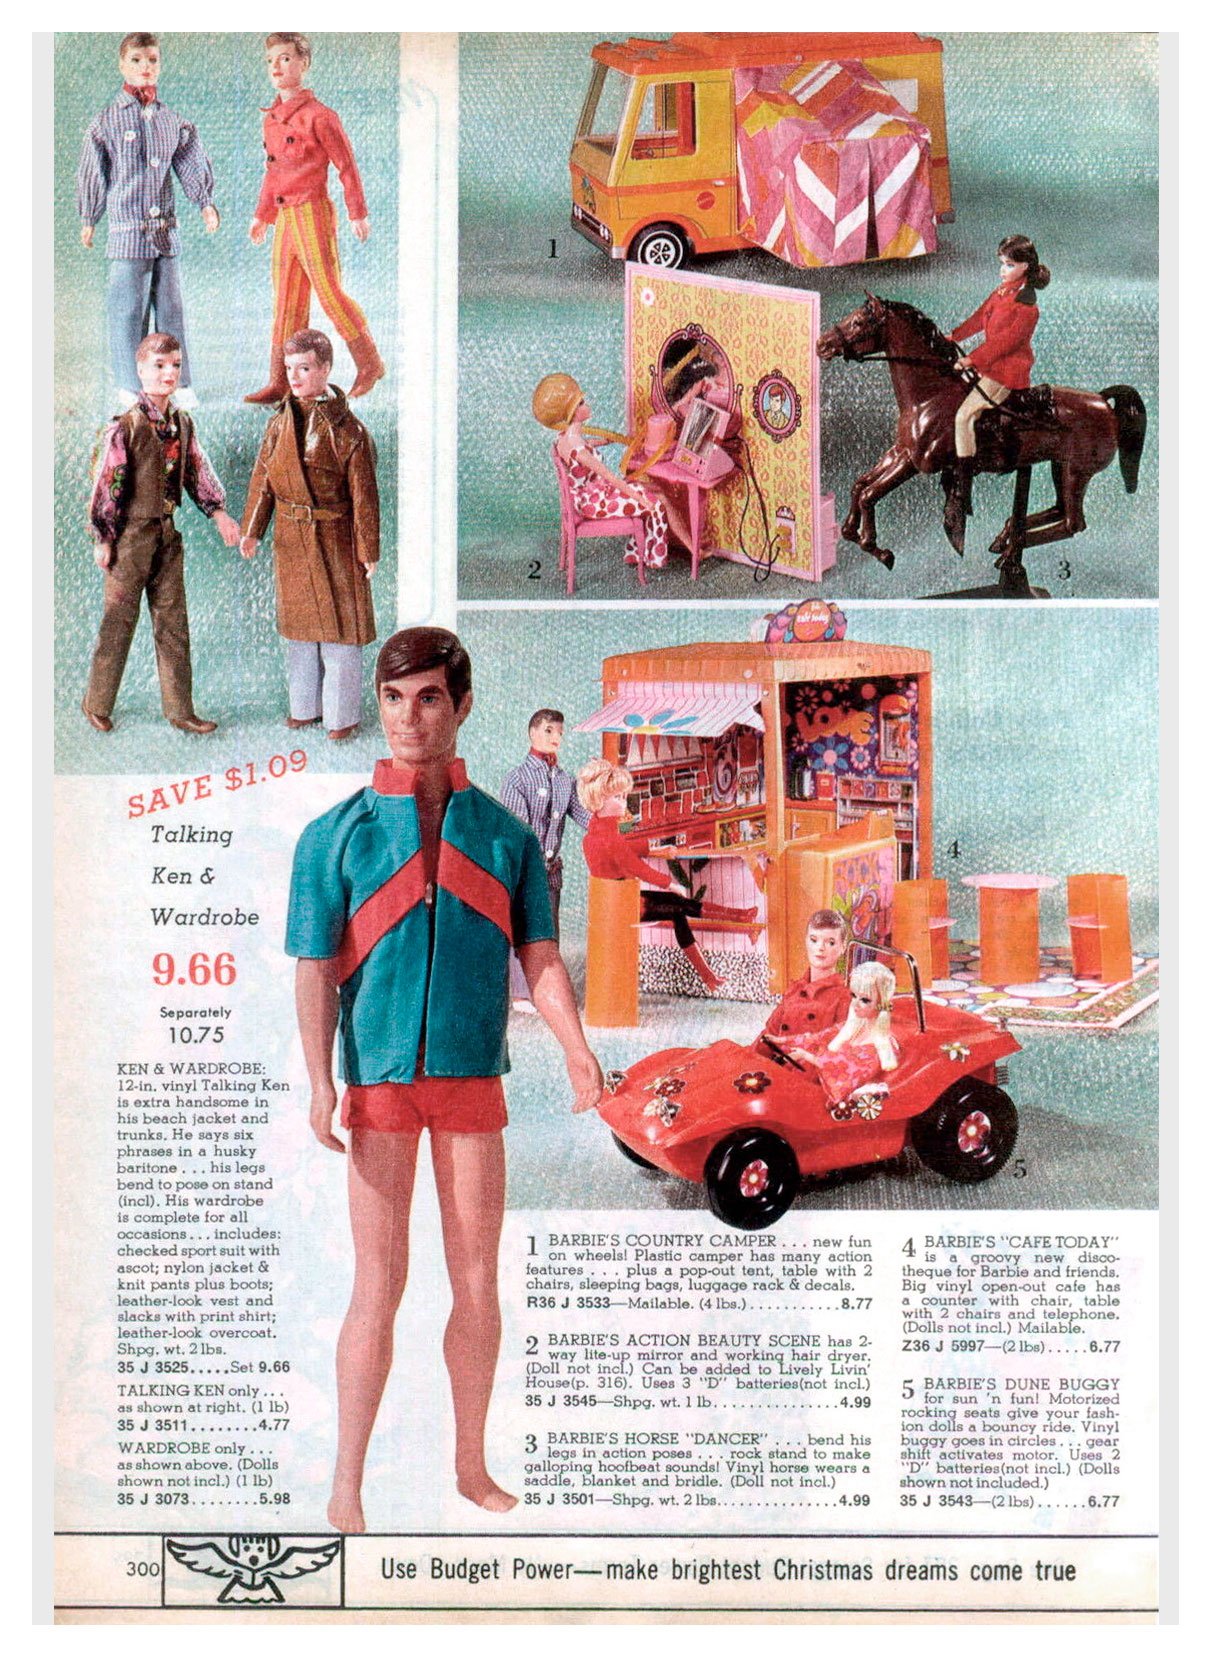 From 1971 Spiegel Christmas catalogue